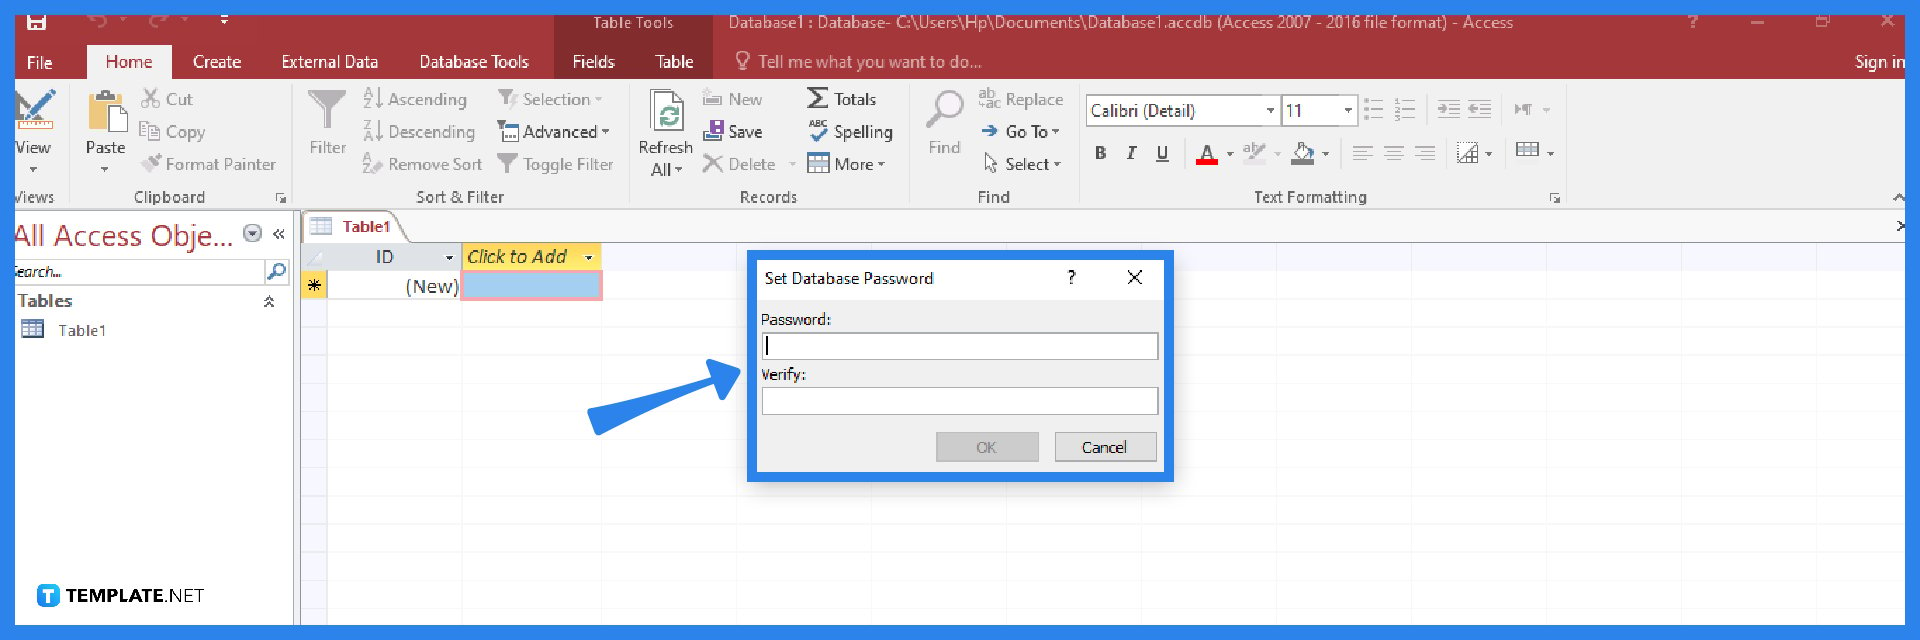 how-to-search-and-protect-data-using-microsoft-access-step-2